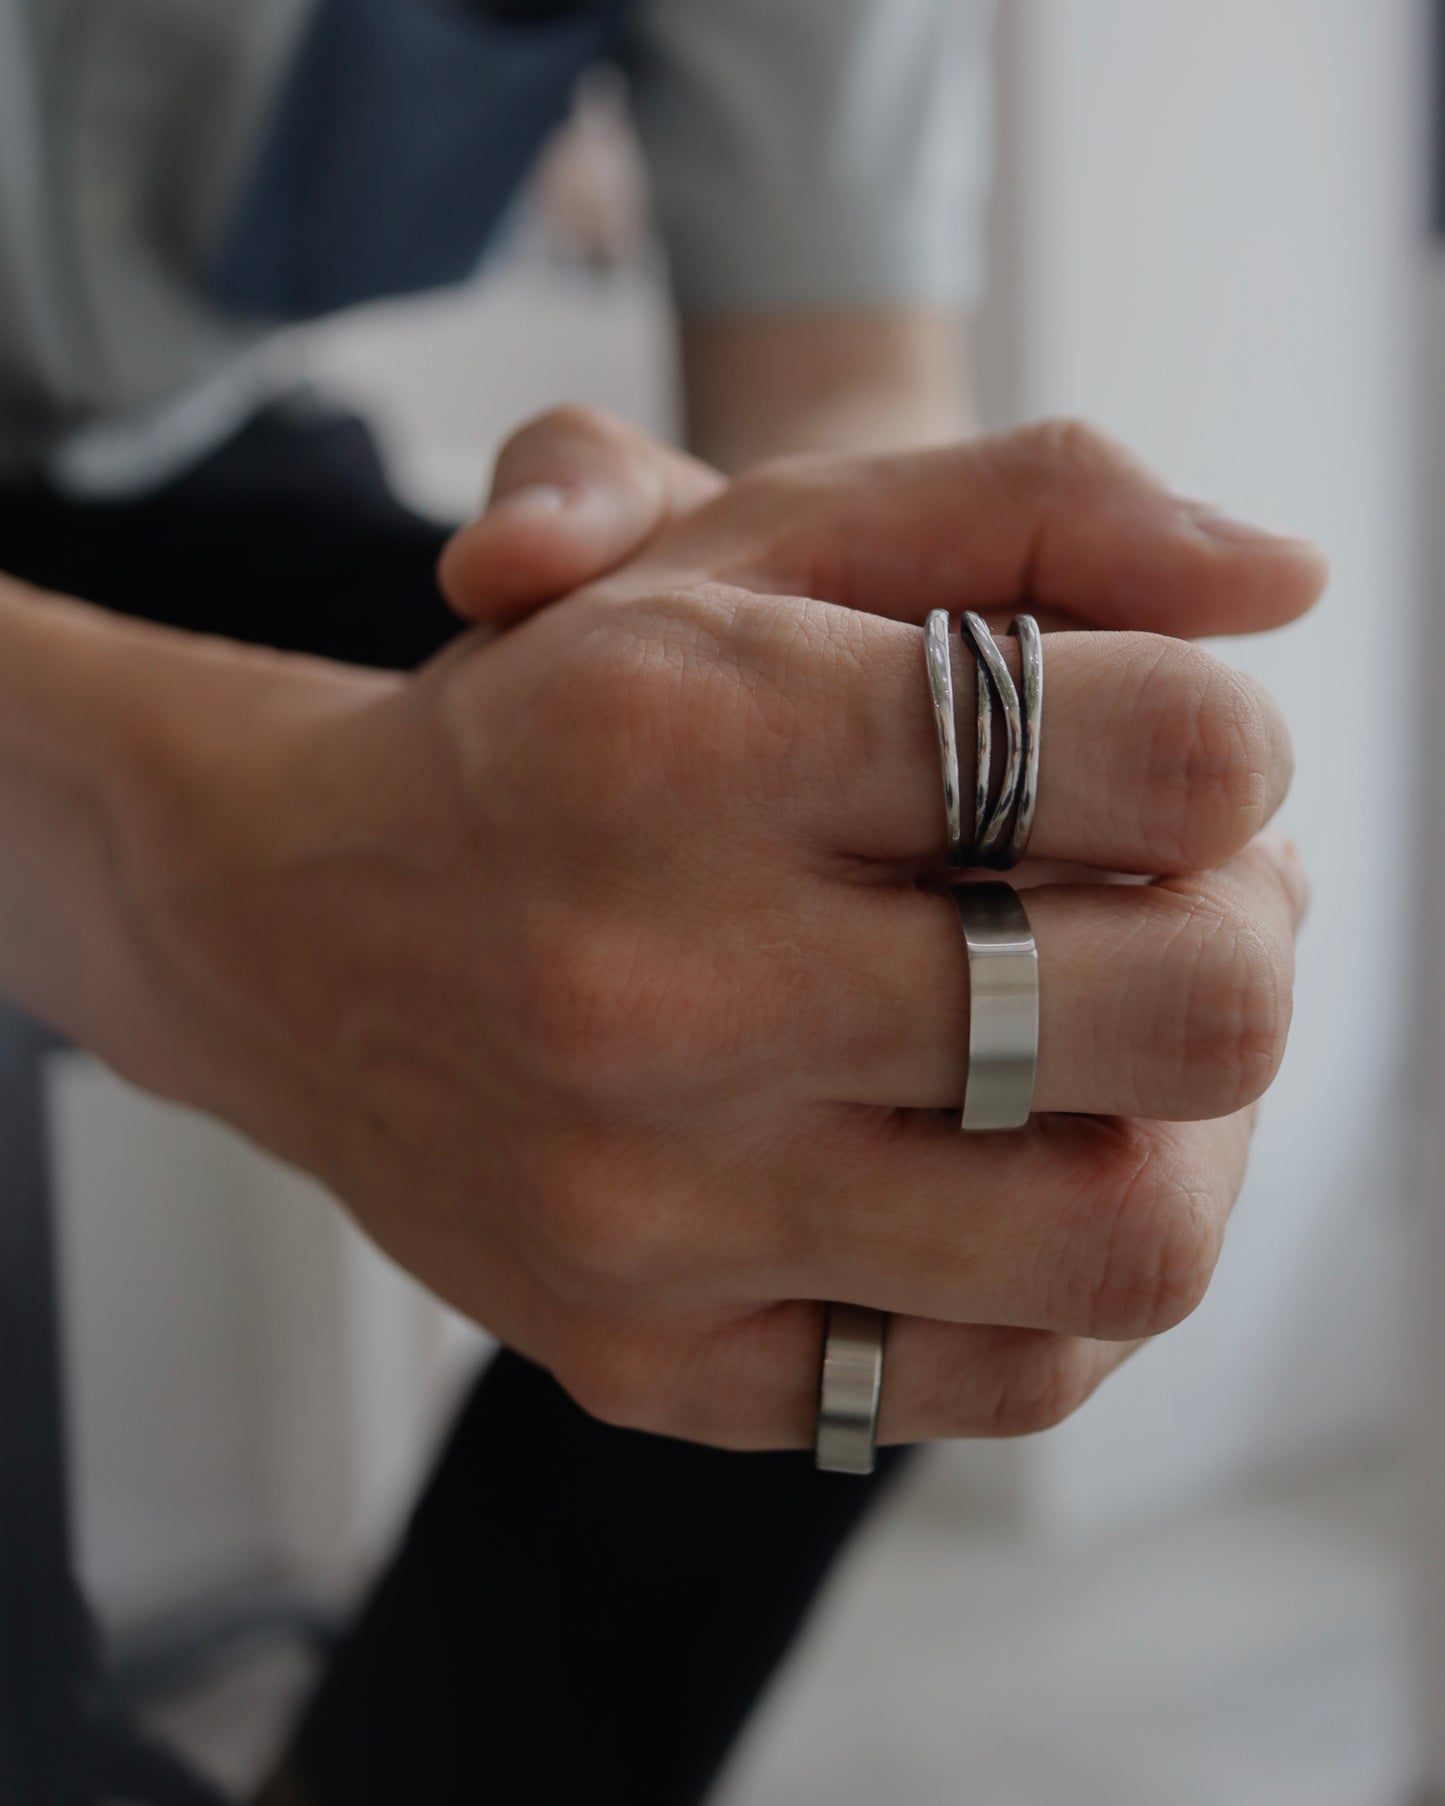 square shaped ring